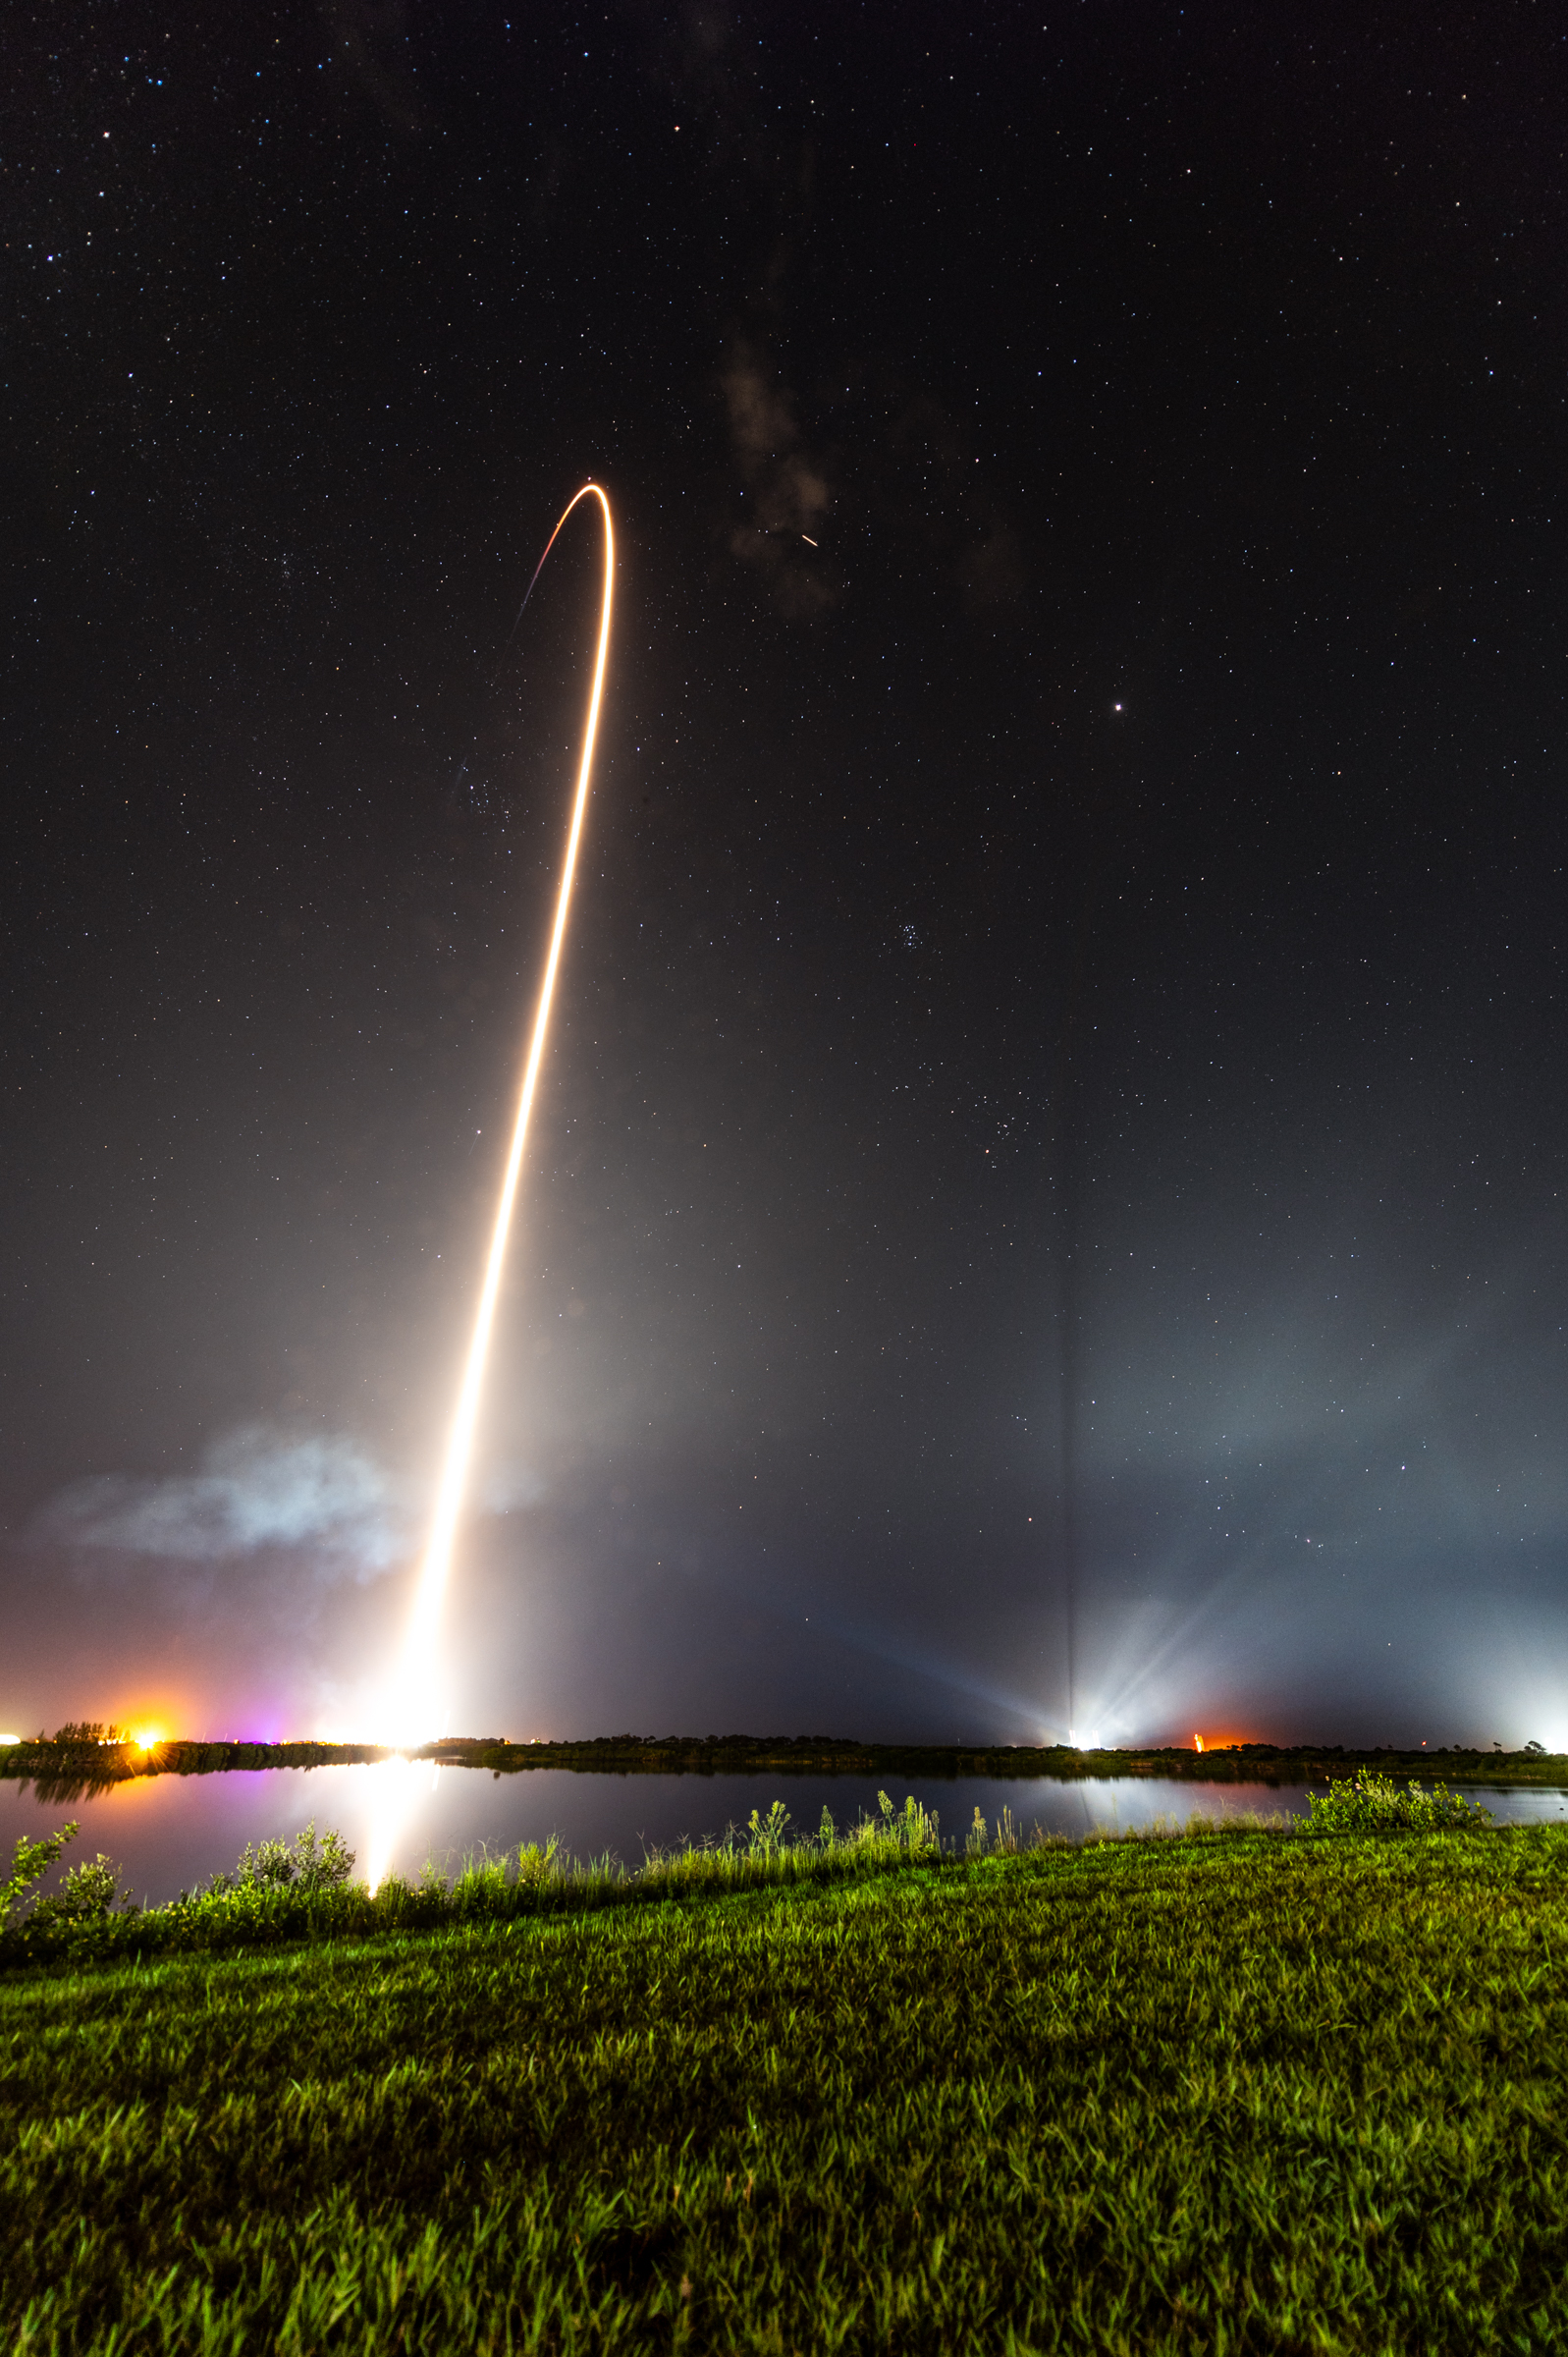 Composite image of launch and a frame for a starry sky.